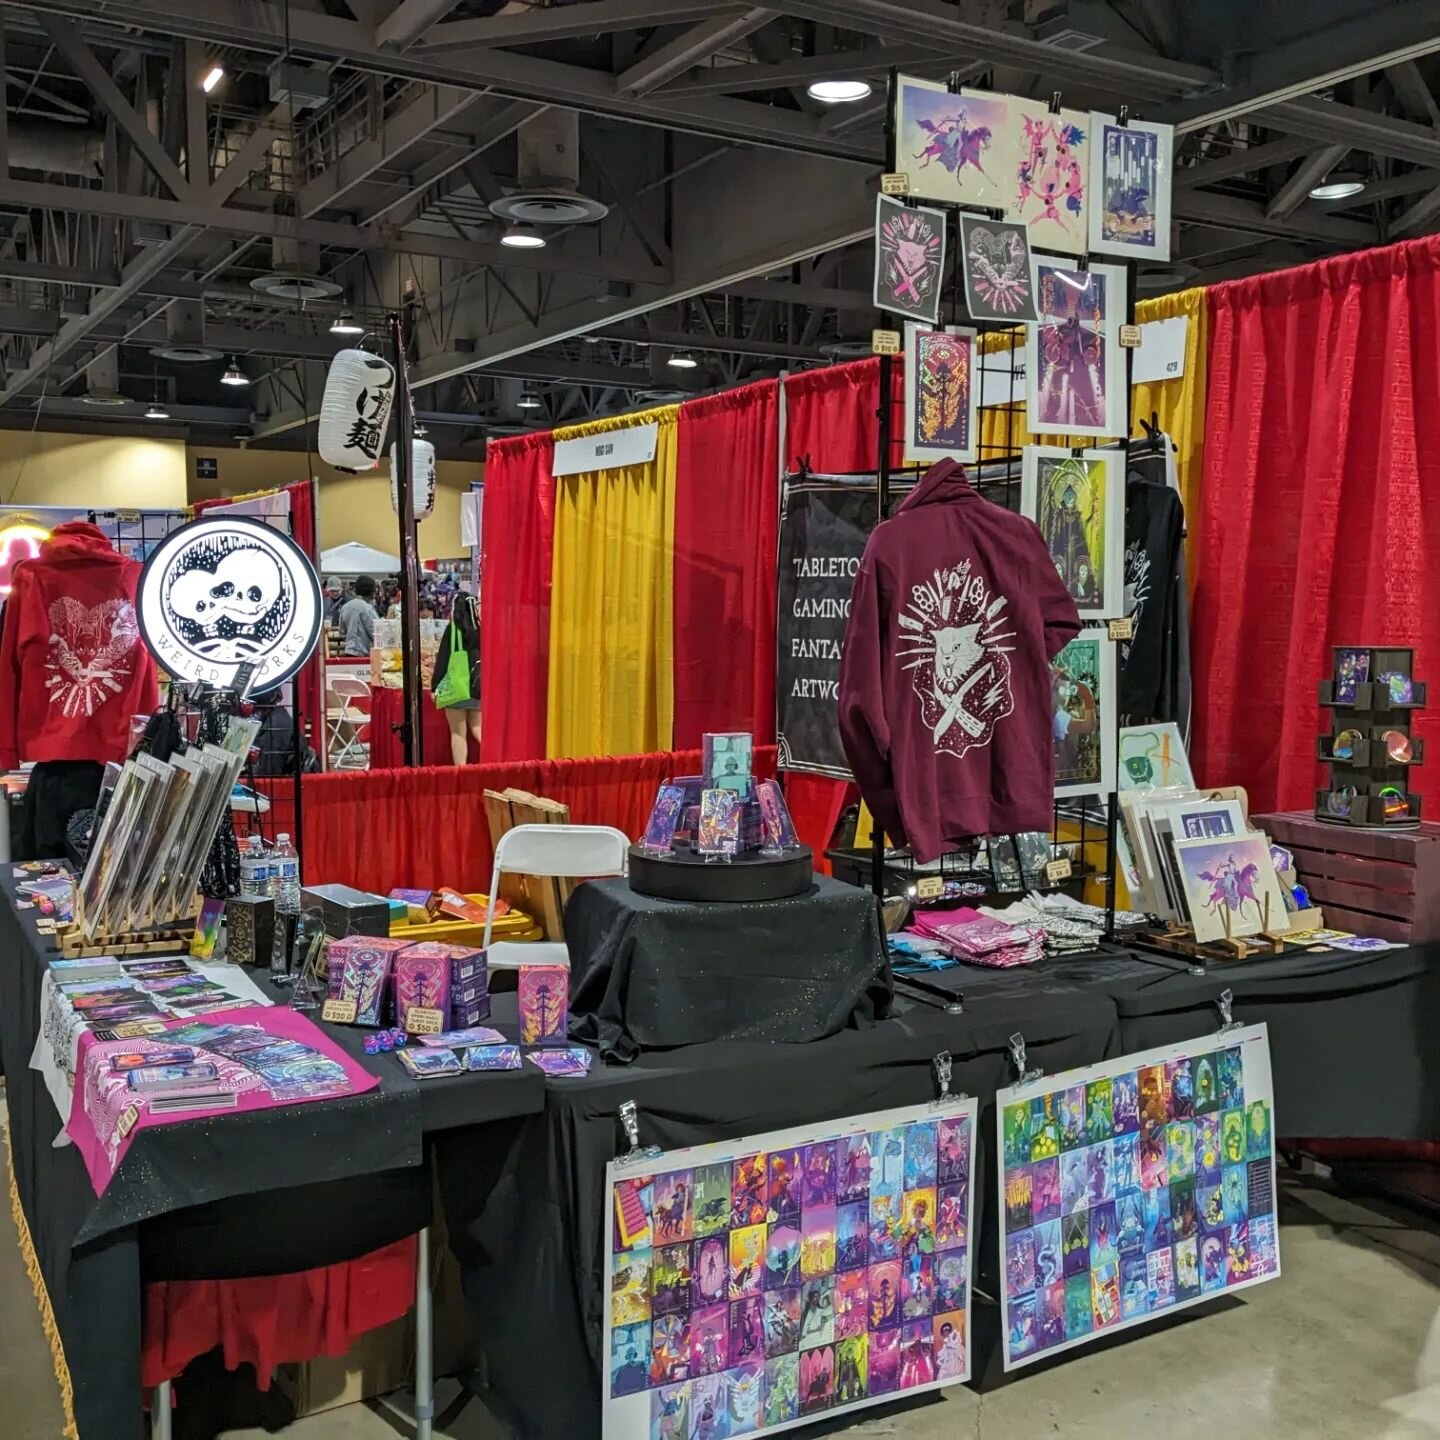 We're all set up at Anime LA stop by our booth 429!